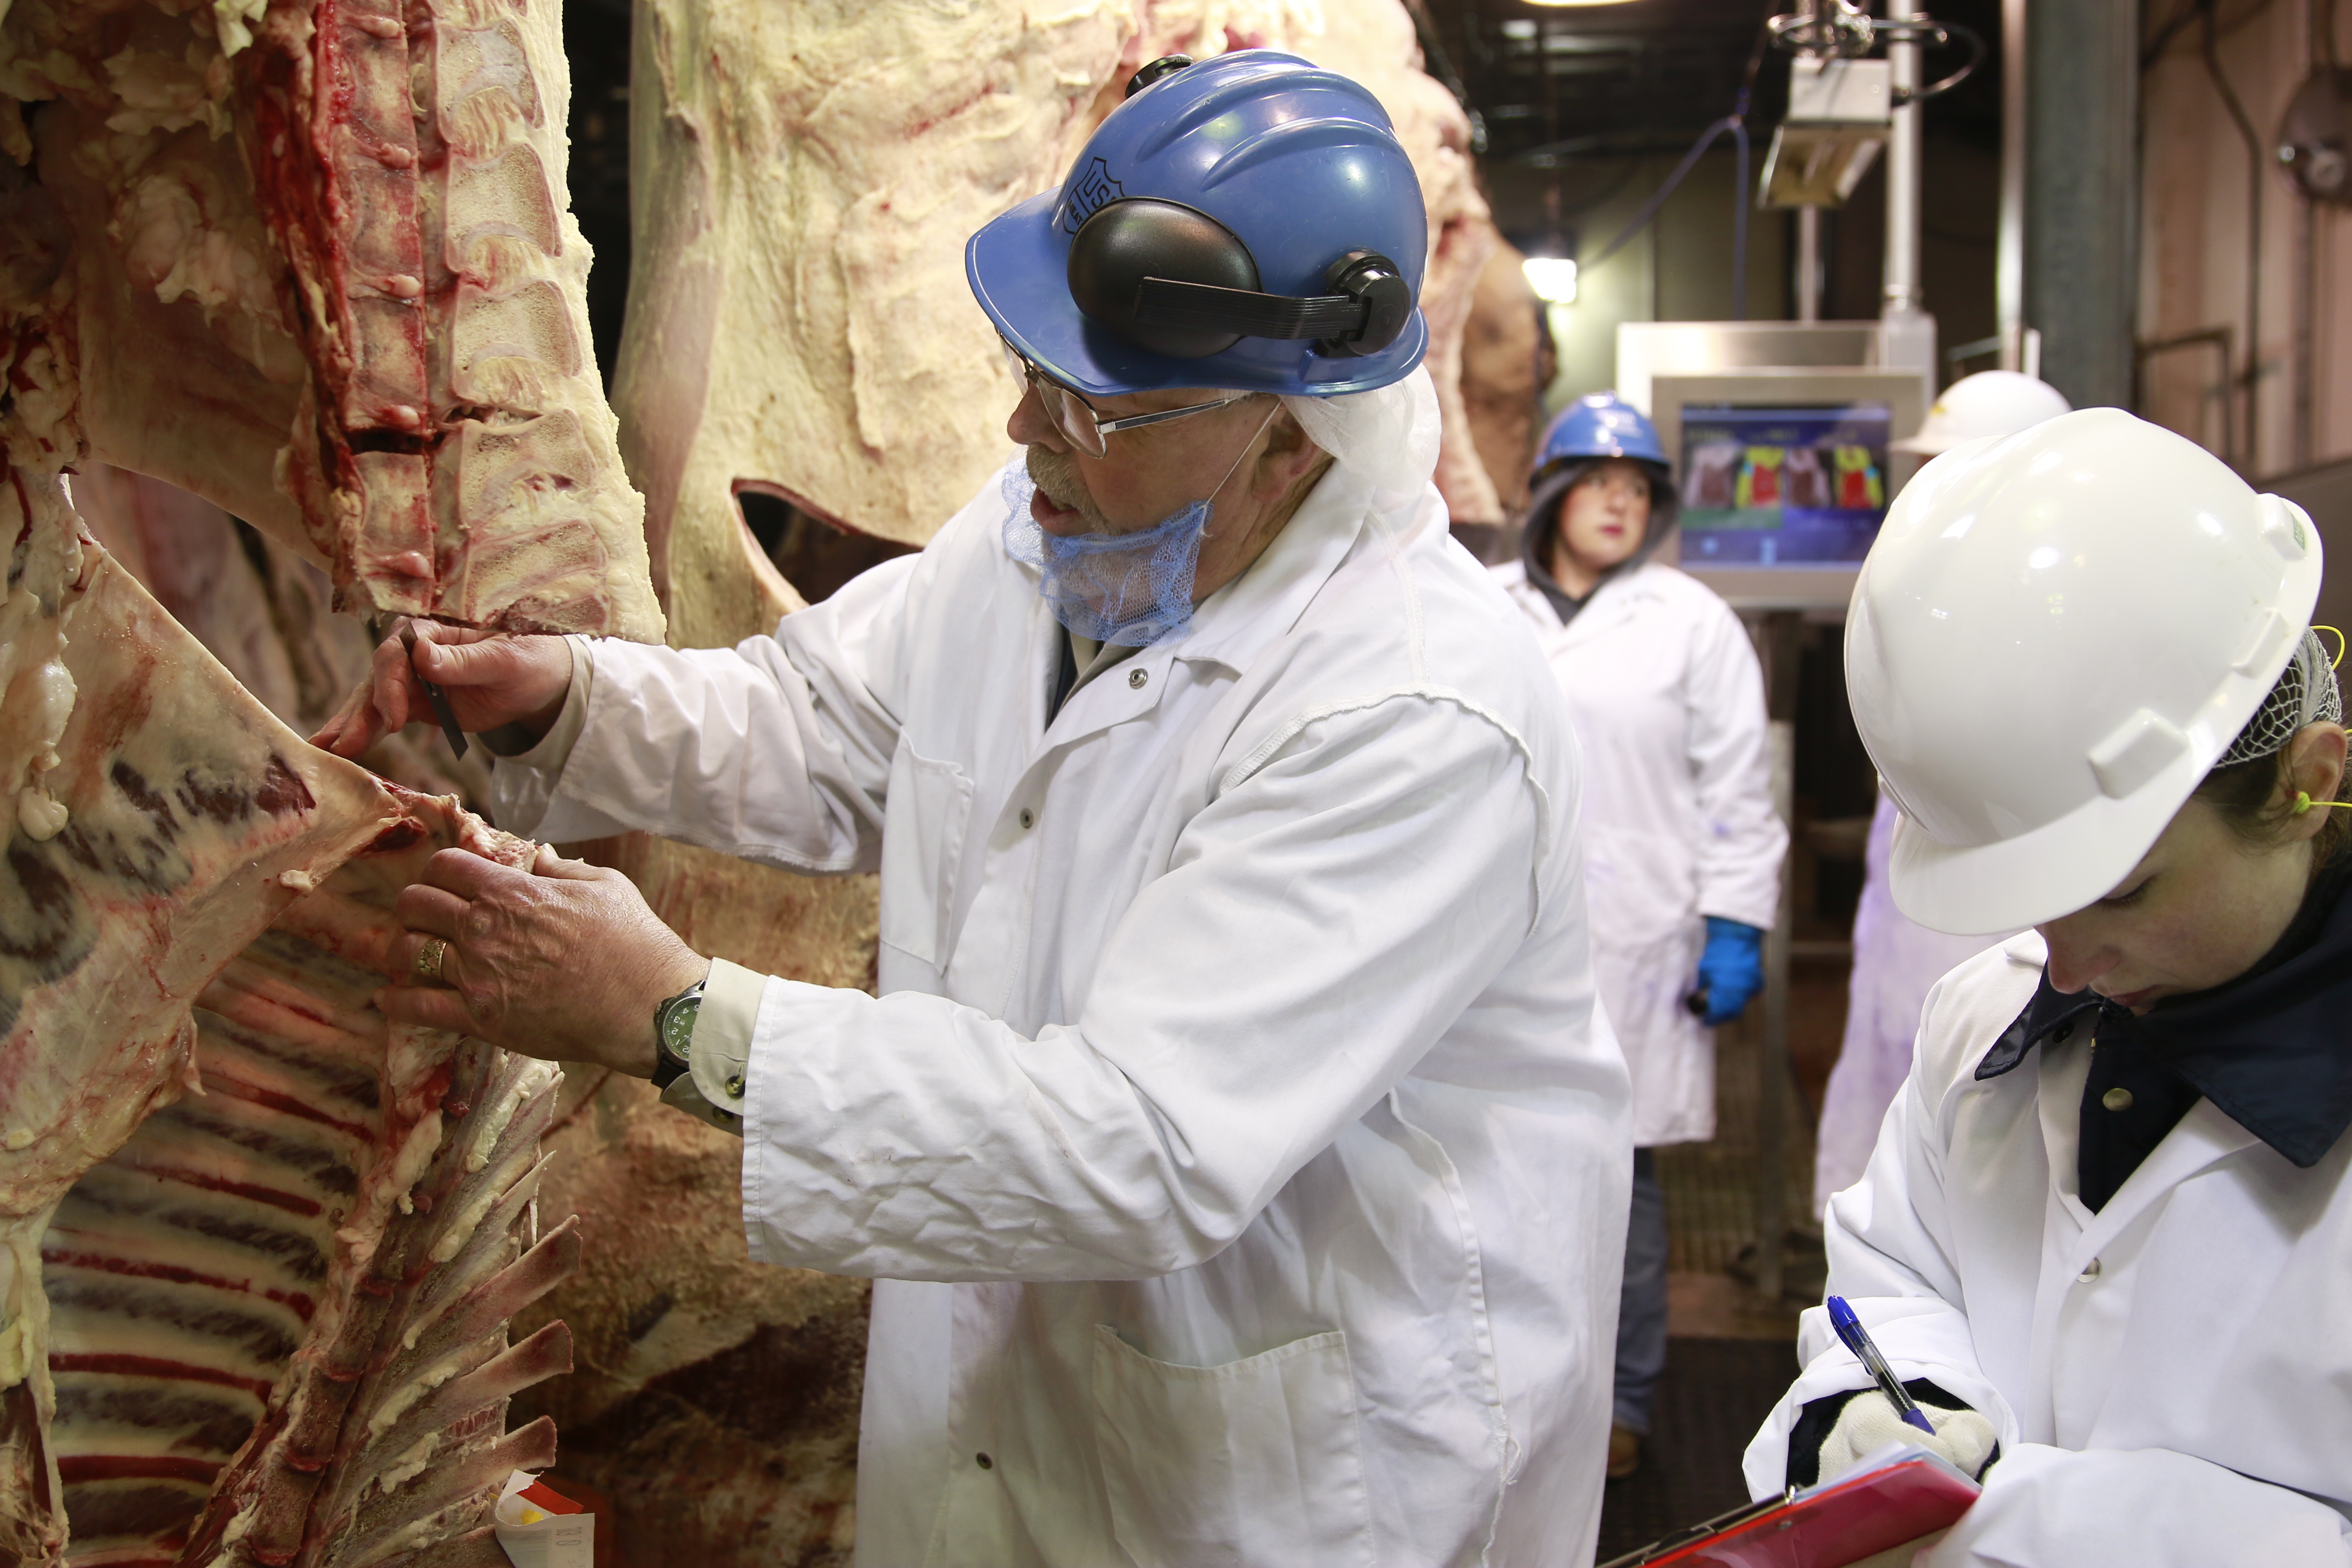 USDA grader collecting beef carcass data (photo by Davey Griffin)